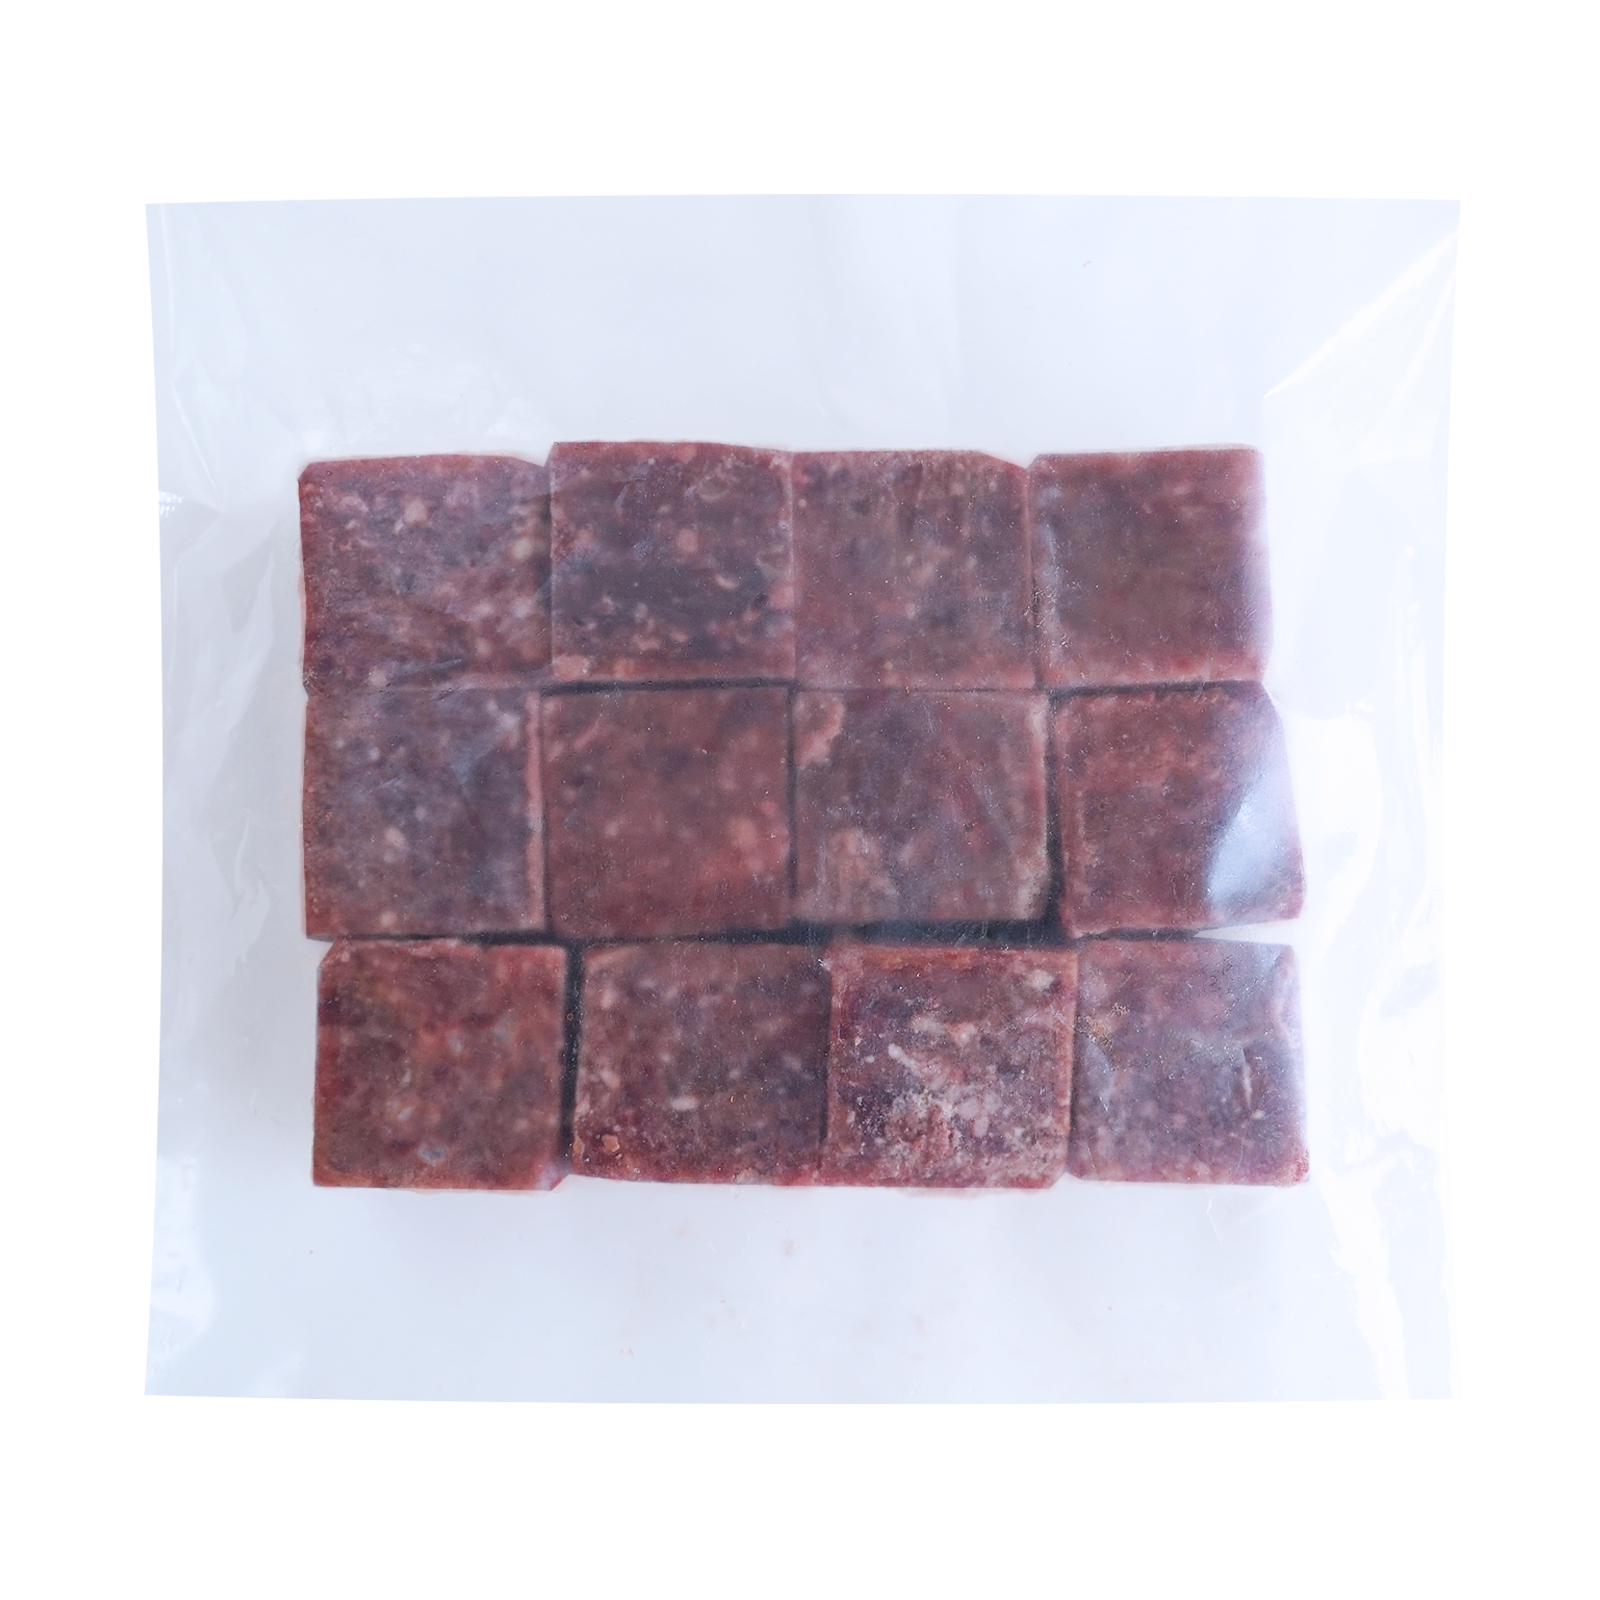 Grass-Fed Mutton Thick Skirt Mince Portioned Cubes from Australia (300g) - Horizon Farms